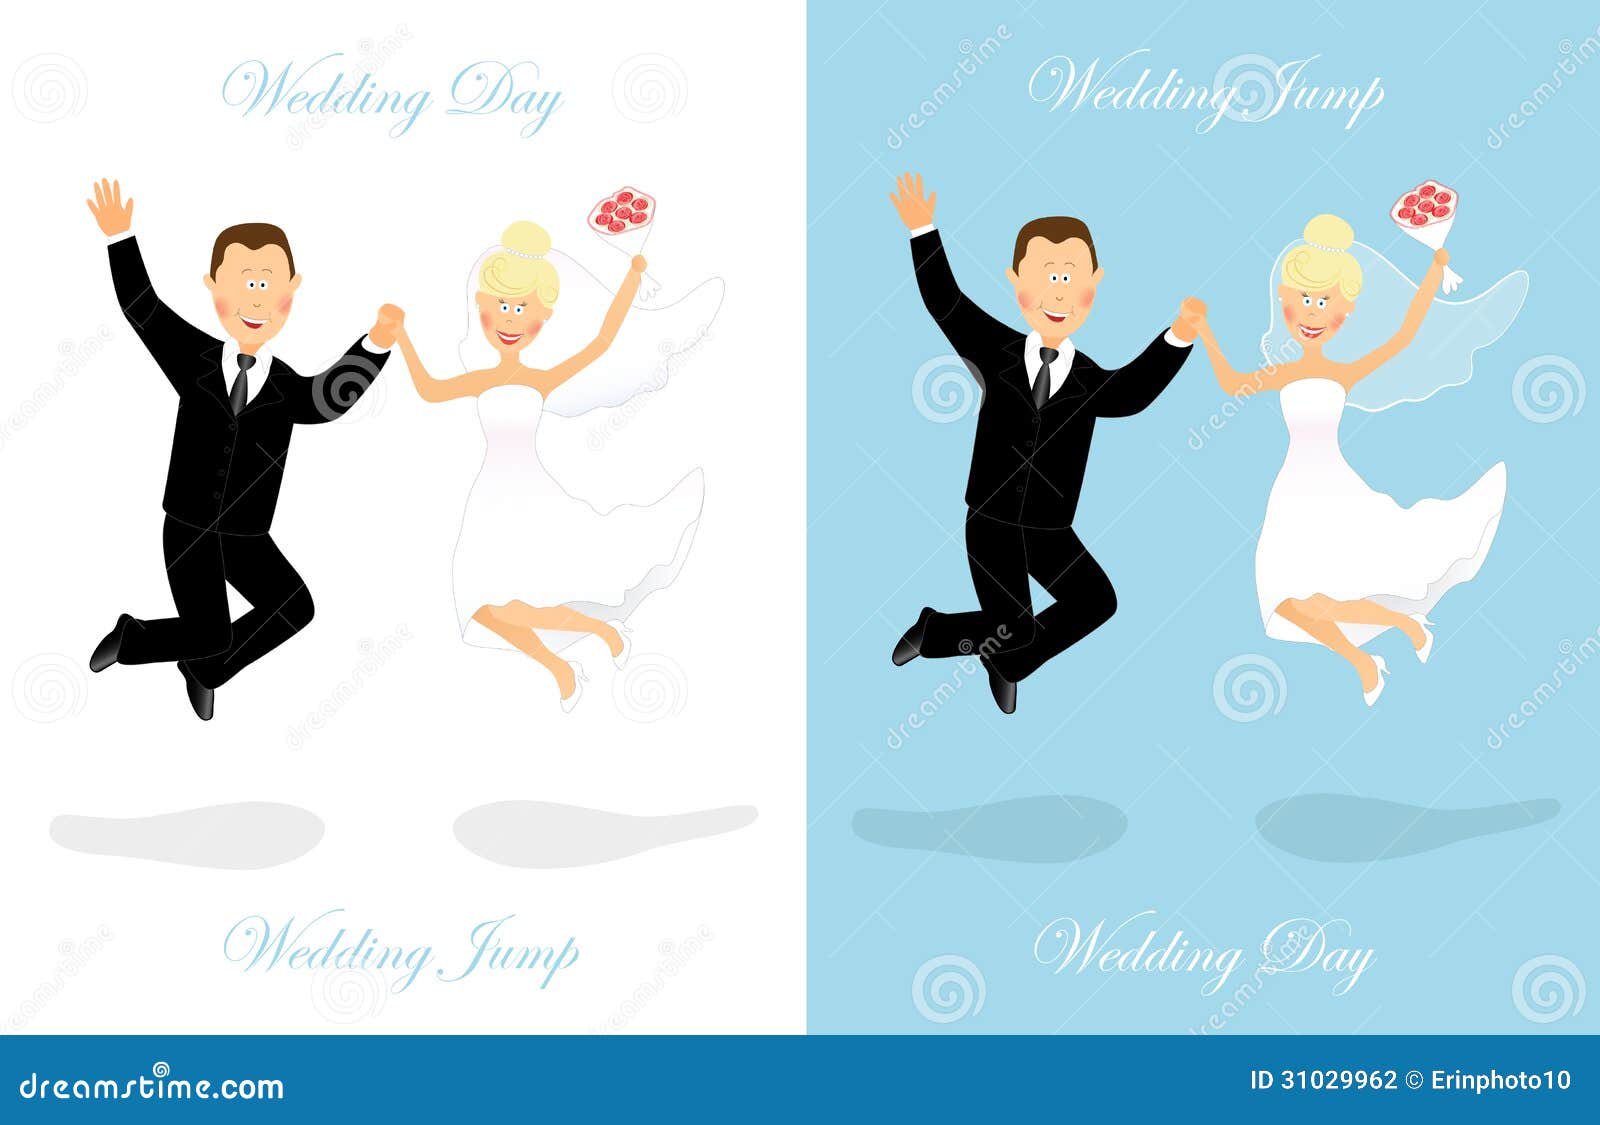 Set of happy wedding couples of caucasian bride and groom while doing wedding jump